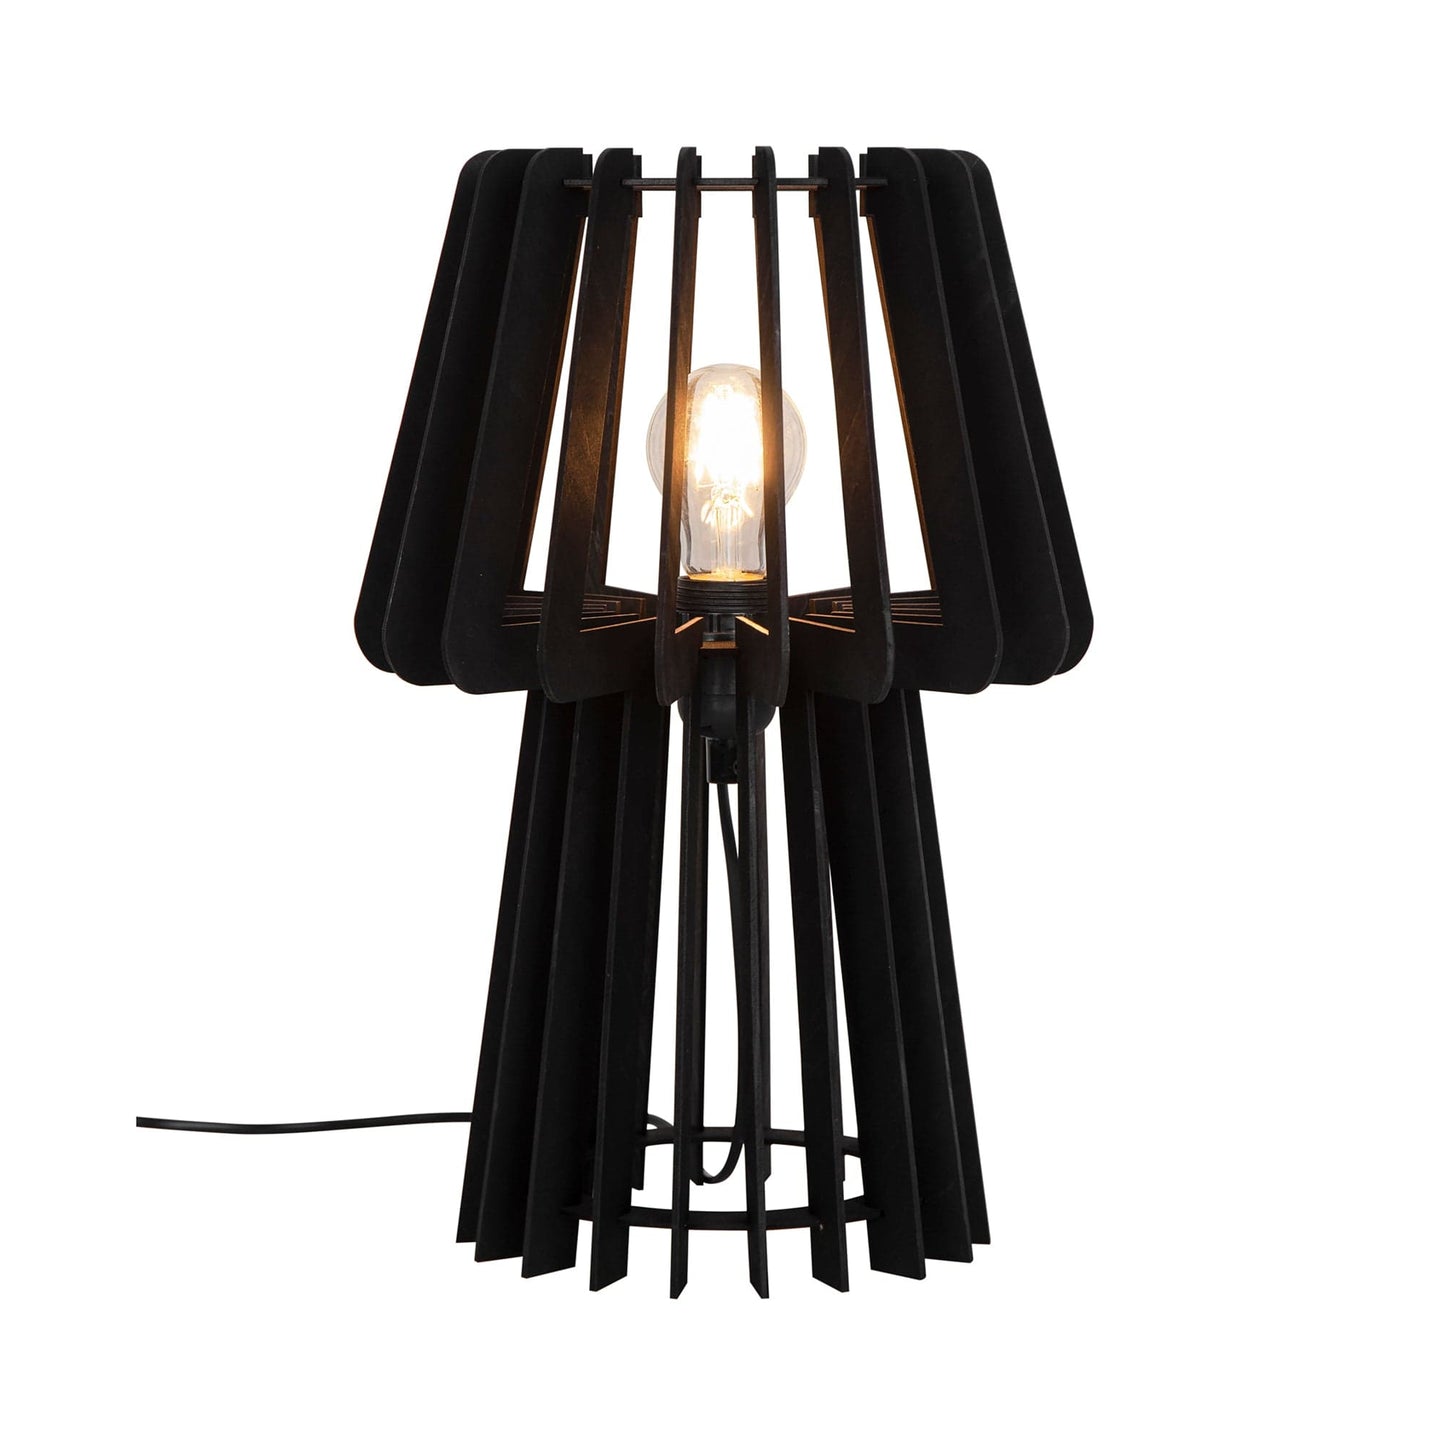 Nordlux Table Lamp Groa Table Lamp, black or wood